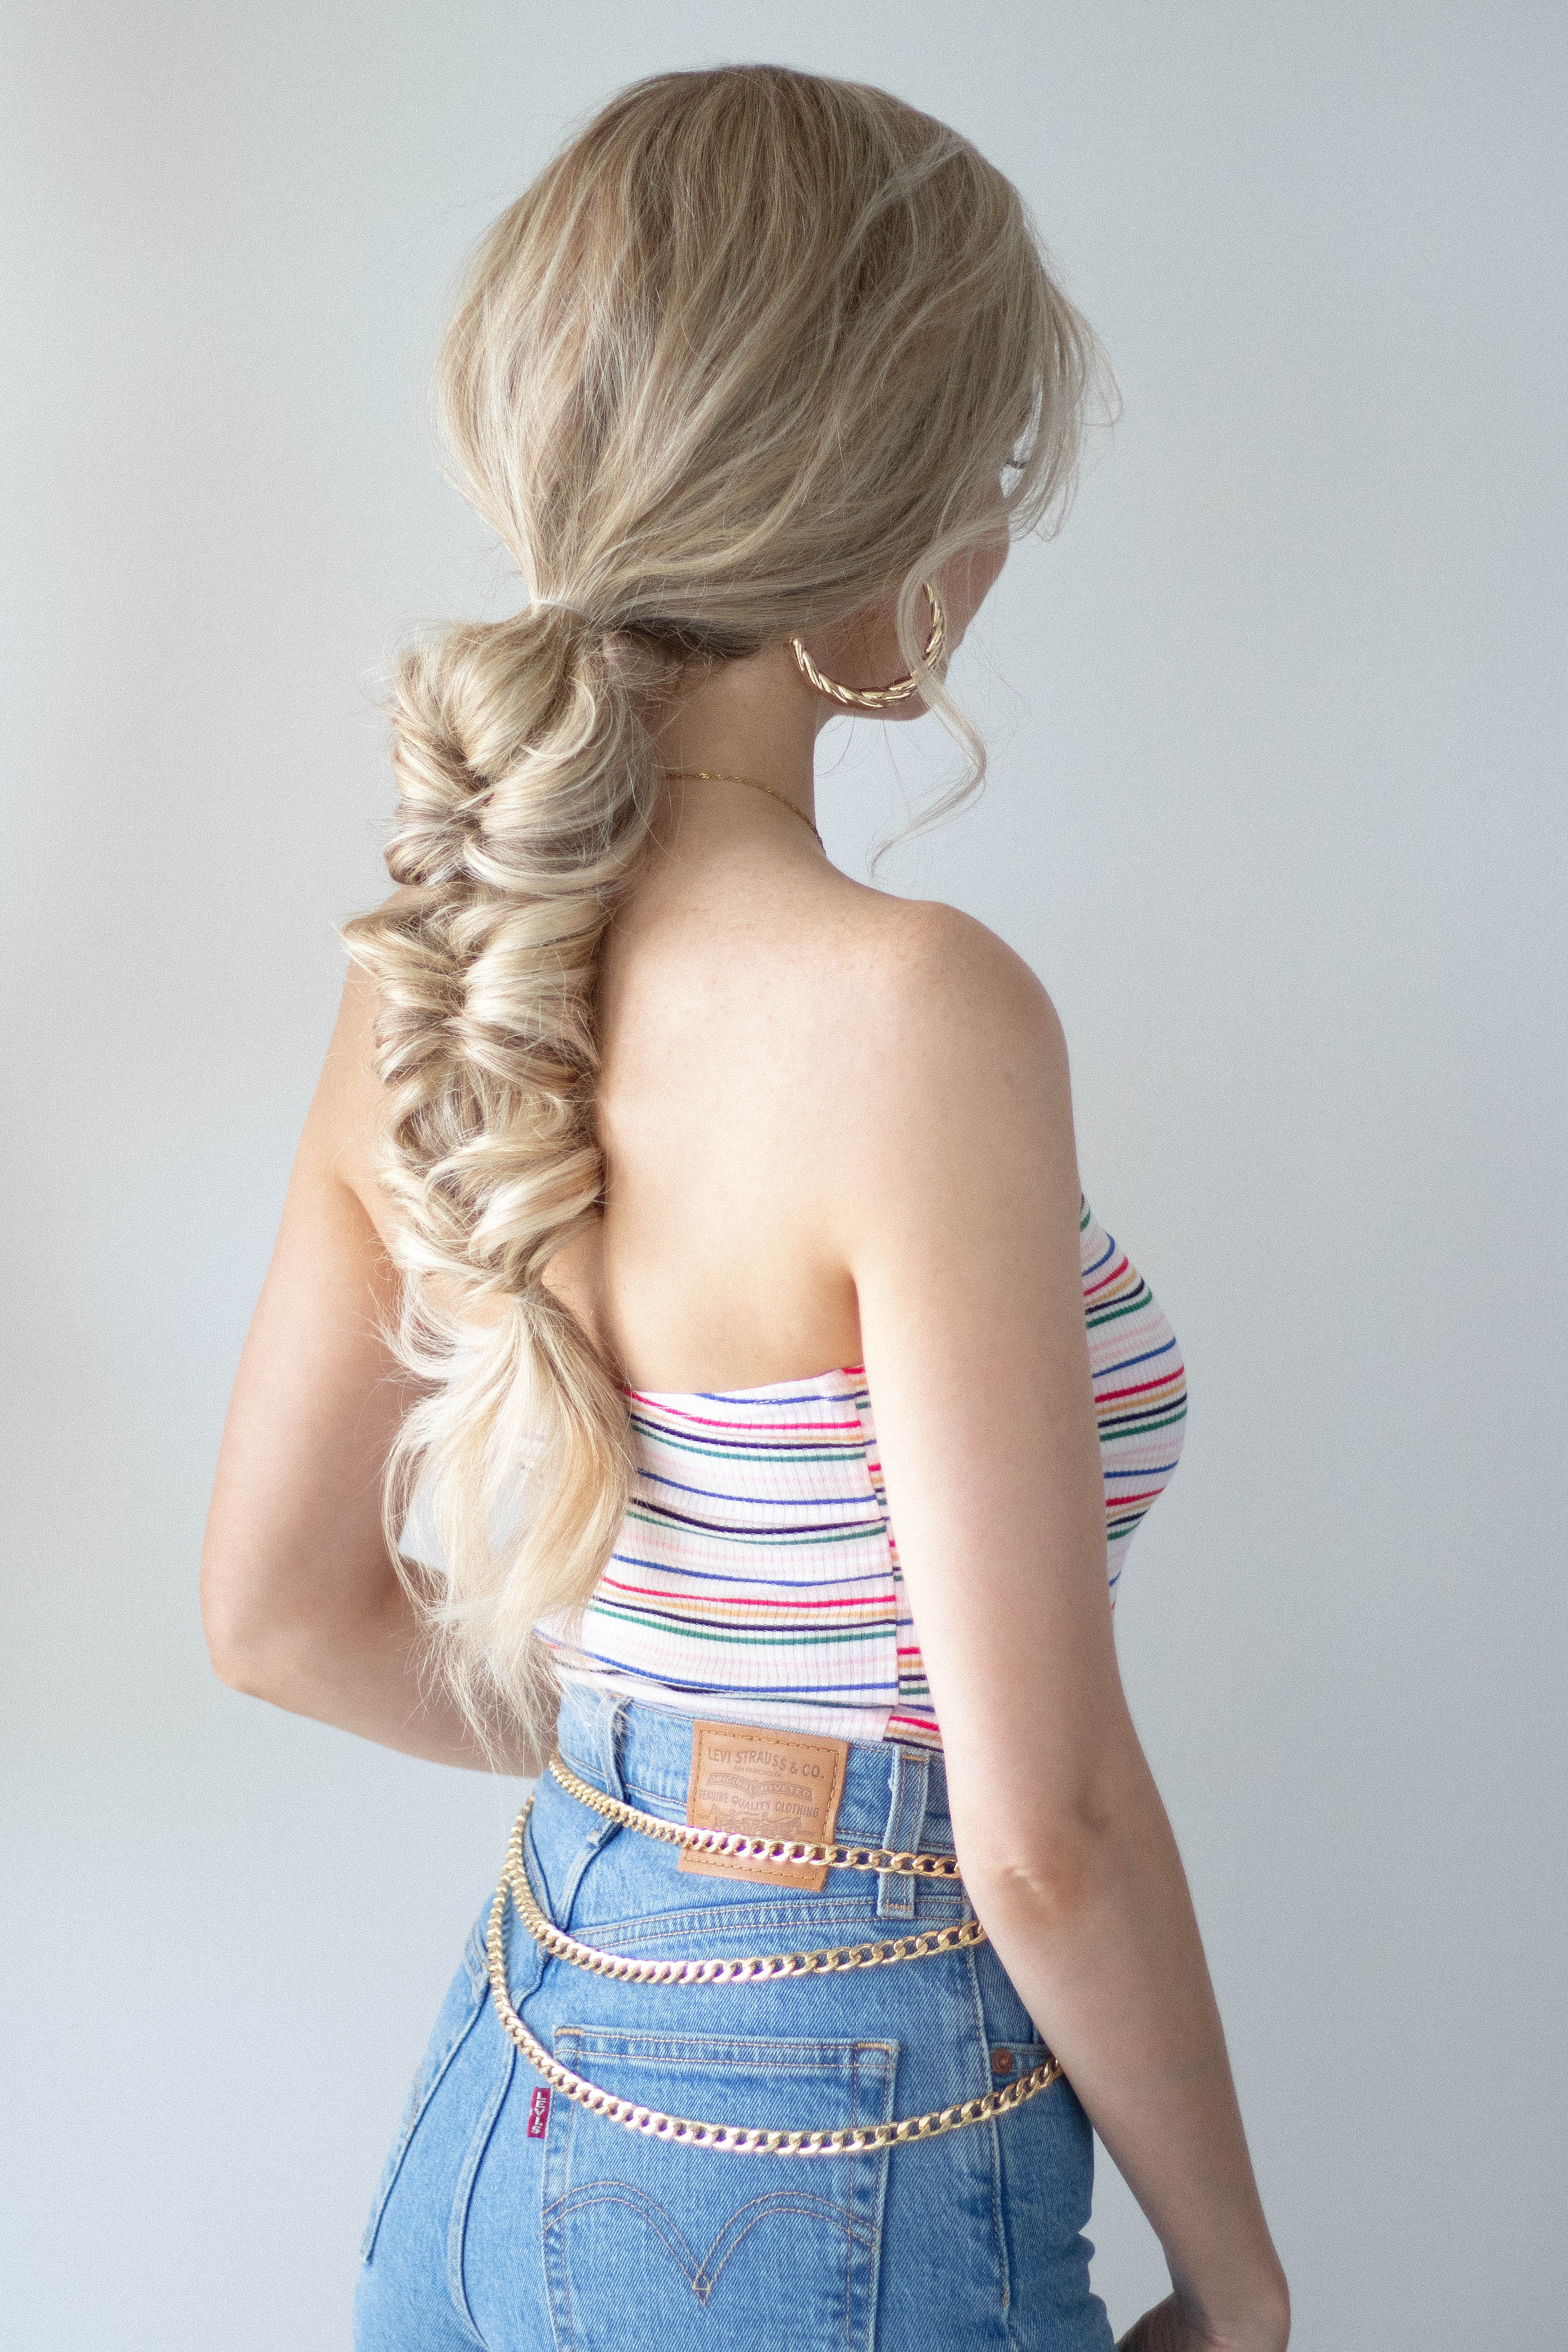 40 Ponytail Hairstyles to Try in 2023  The Trend Spotter